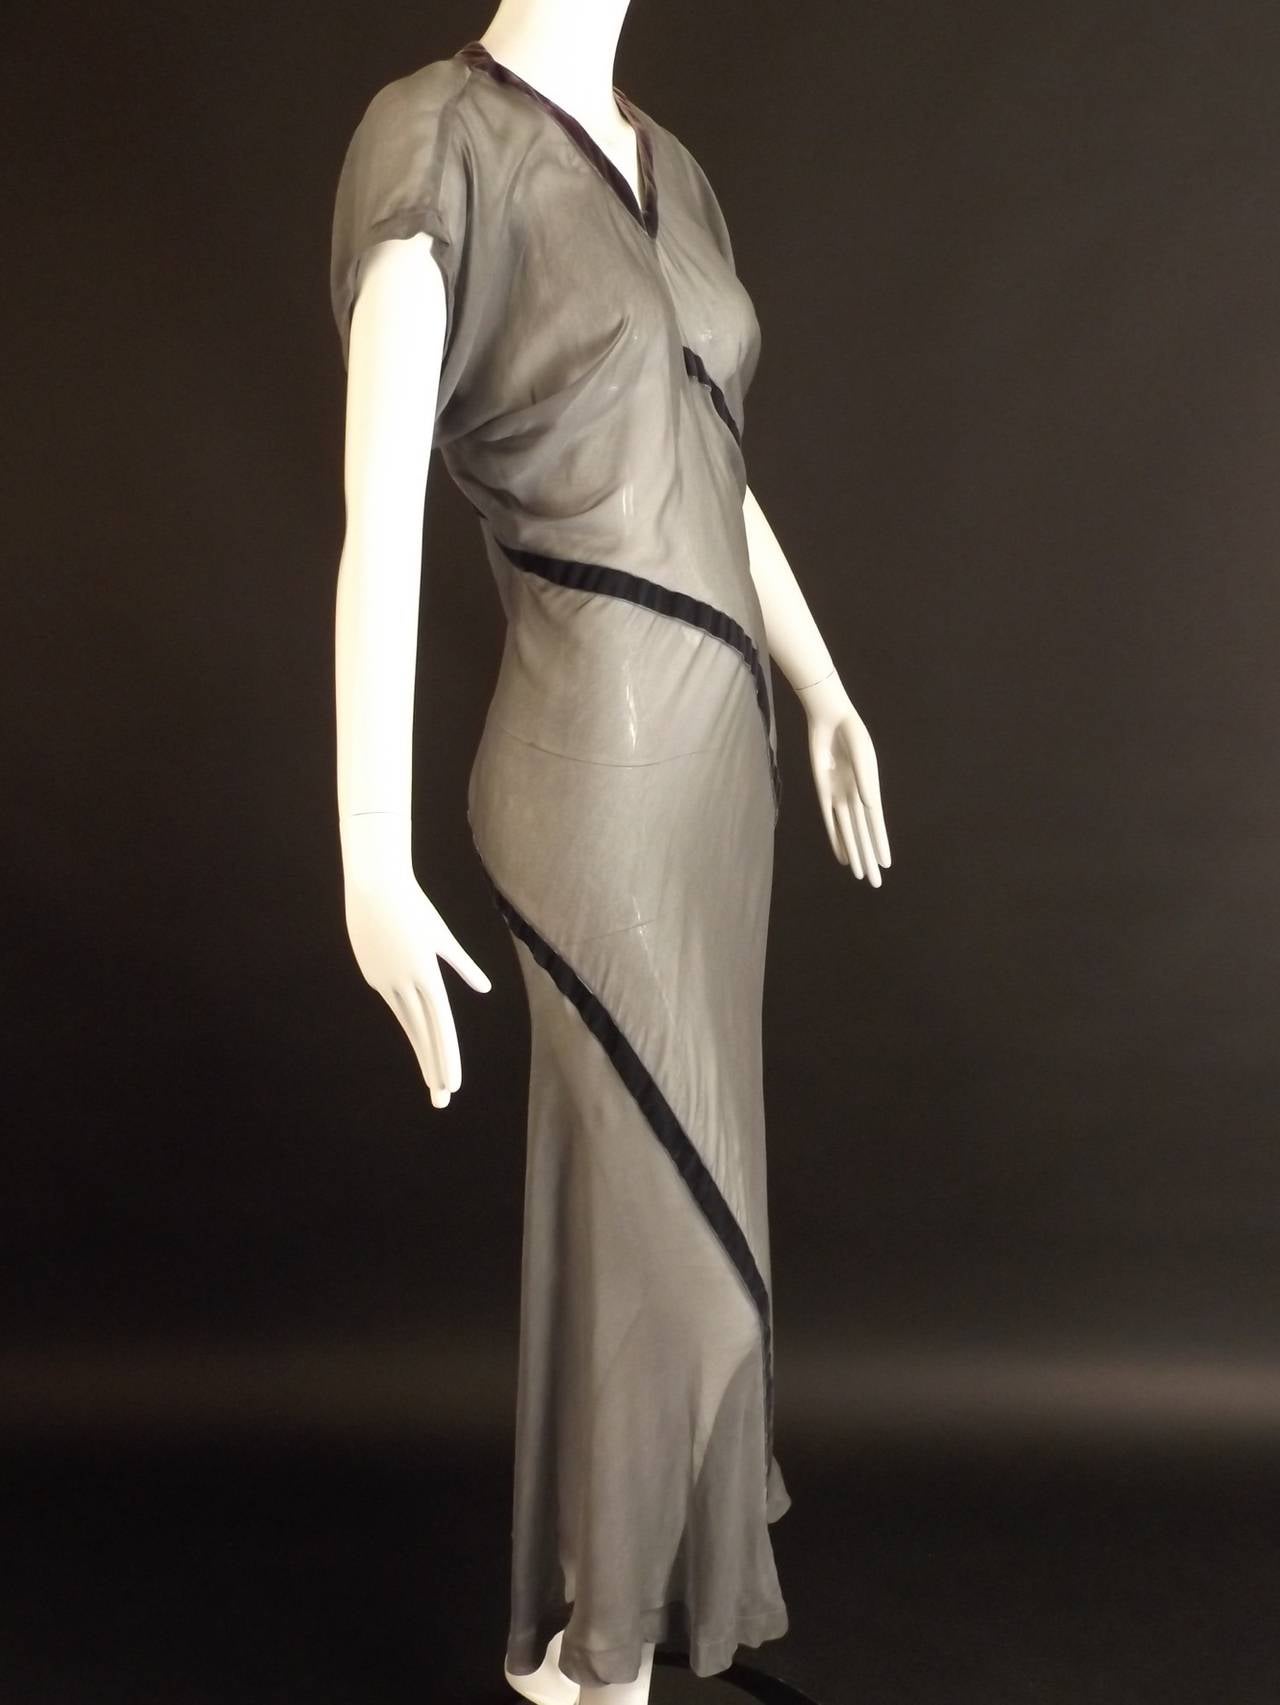 Late 1990s evening or maxi dress in a faded gray rayon chiffon that is cut on the bias.  The dress has 2 dark gray velvet ribbons that circle the dress, but what is amazing is the ribbons are actually hiding the seams of the construction. It's